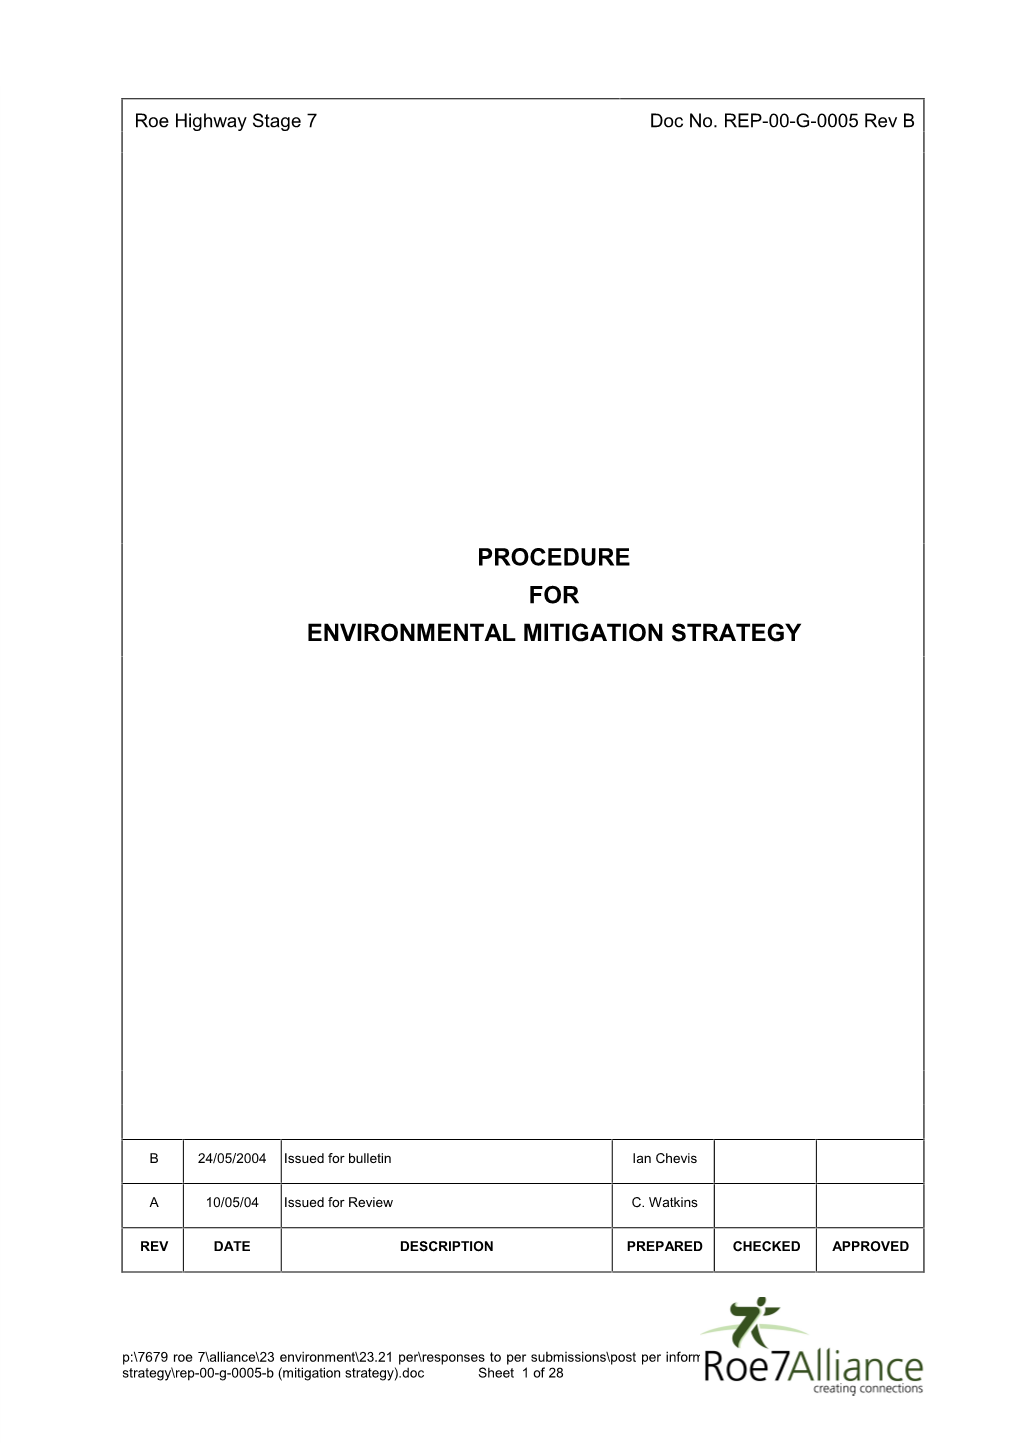 Procedure for Environmental Mitigation Strategy